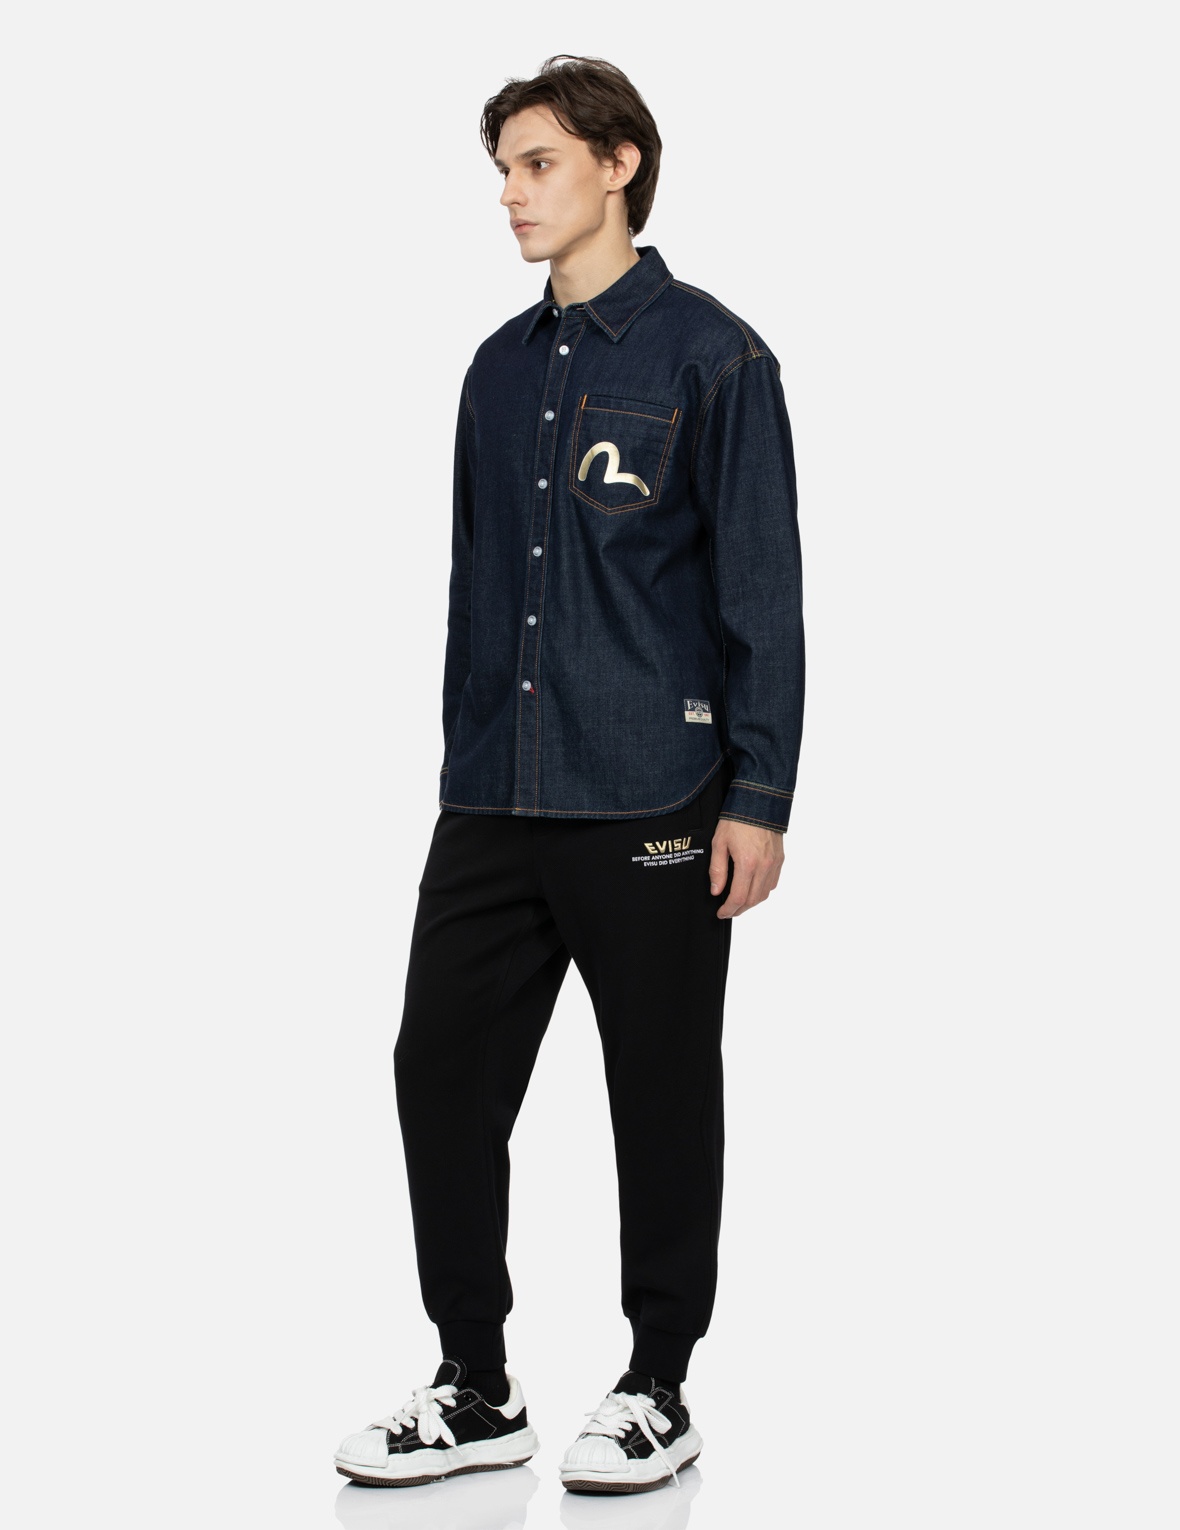 KAMON STITCHING AND THE GREAT WAVE DAICOCK PRINT RELAX FIT DENIM SHIRT - 4